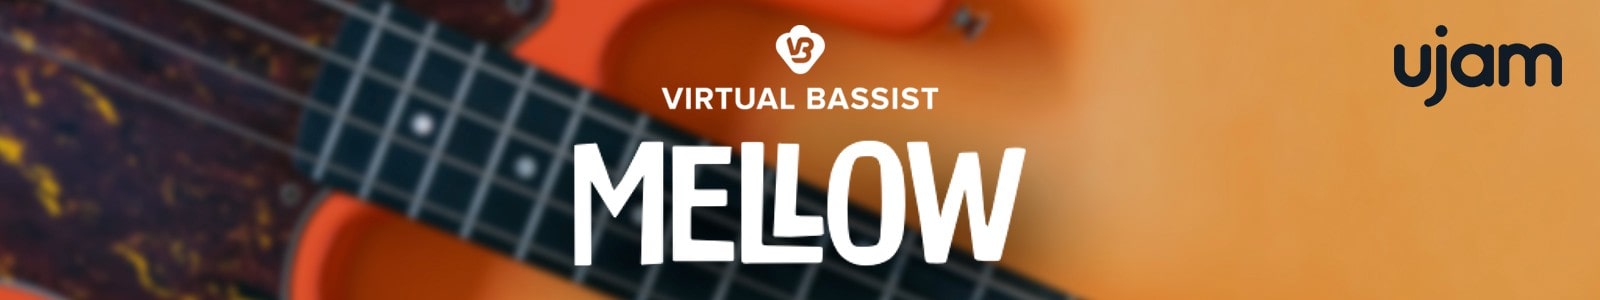 Virtual Bassist Mellow by Ujam